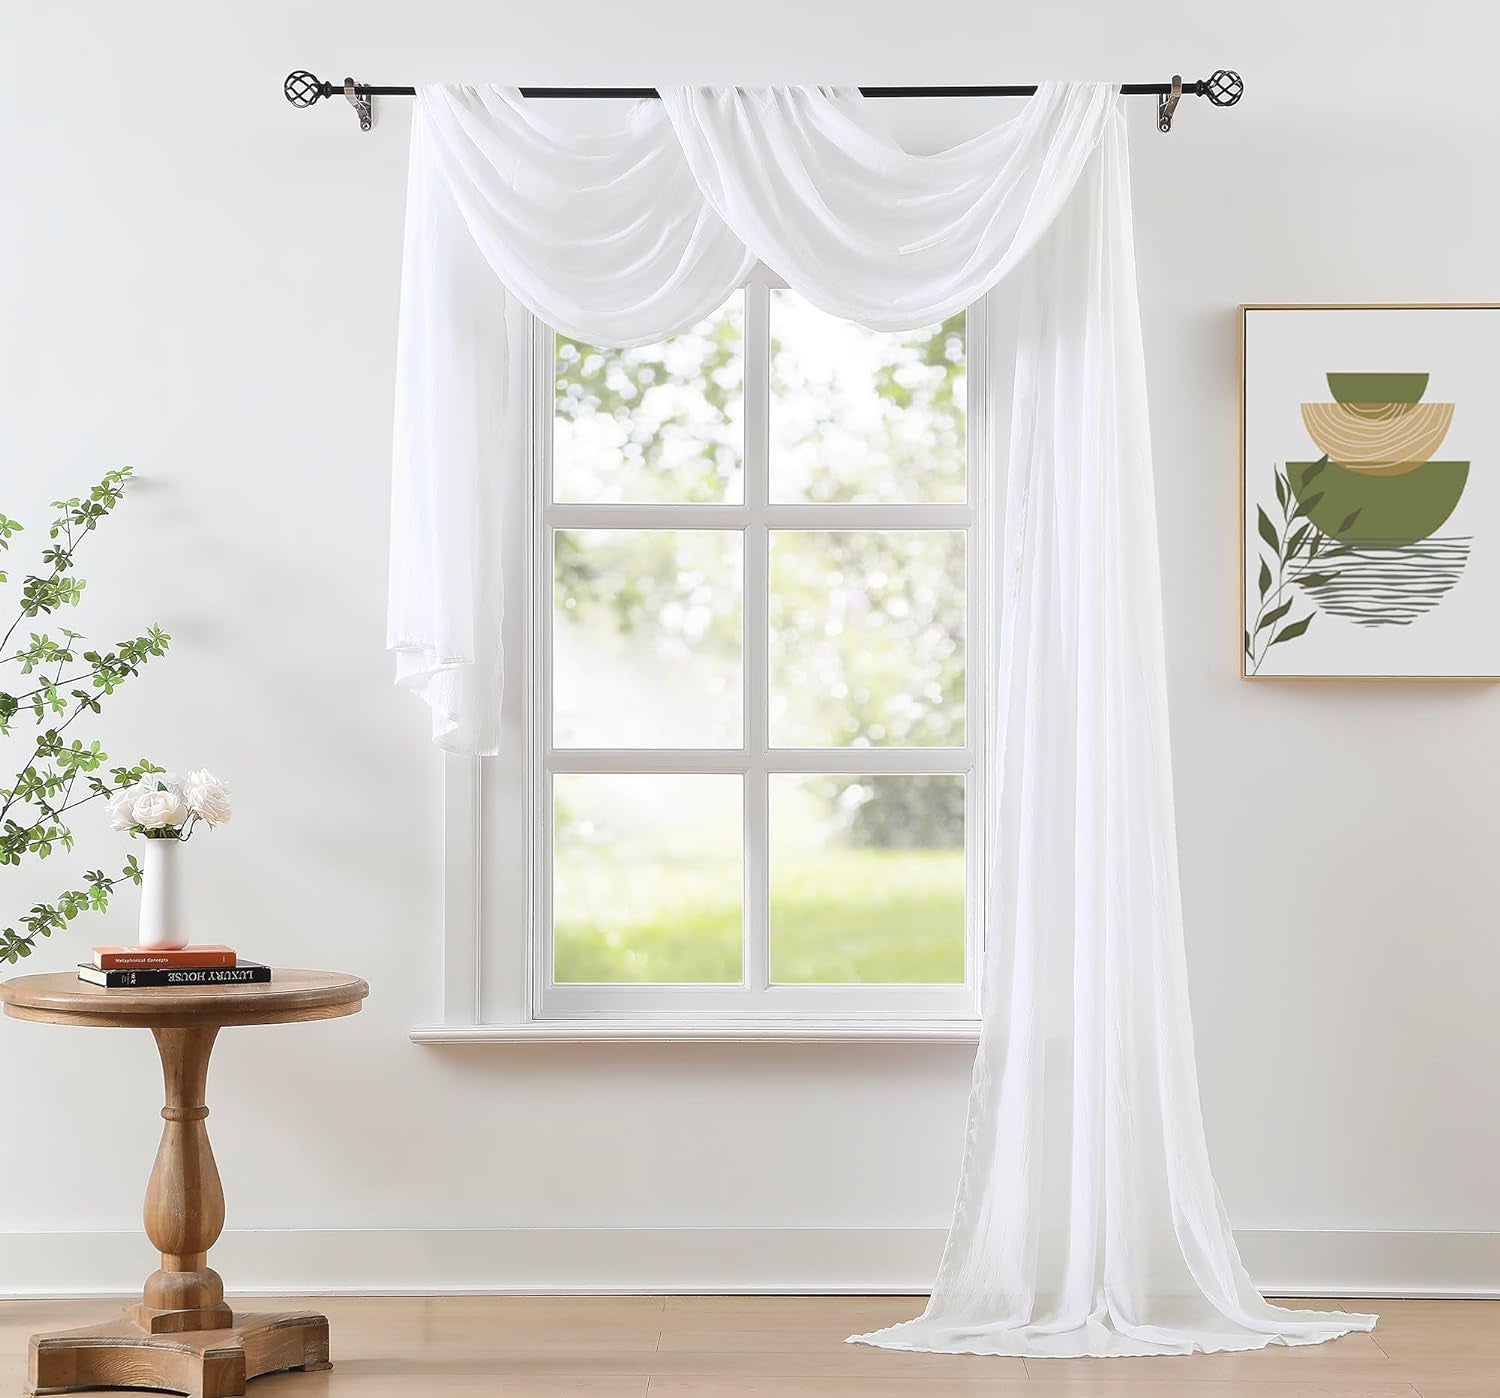 1 Piece Ombre Chiffon Sheer Window Scarf Valance Curtains 18Ft for Living Room, Home Decor, 52"X216" Long Crinkle Soft Window Top Sheer Voile Valance for Wedding Party Decor, Grey